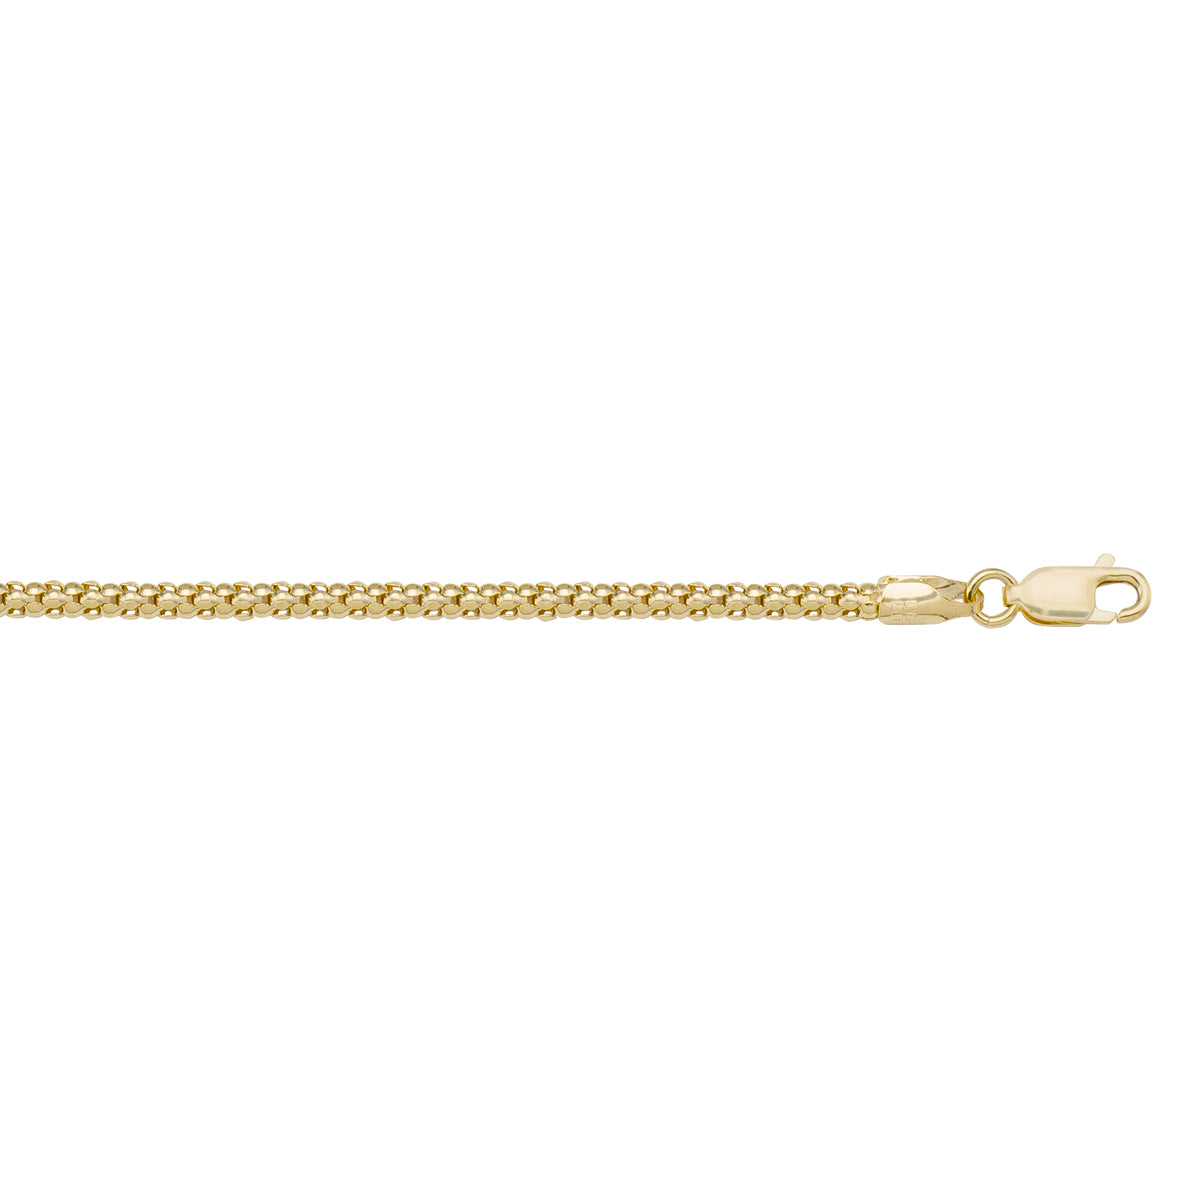 CHAINS YELLOW GOLD HOLLOW POPCORN LINK 